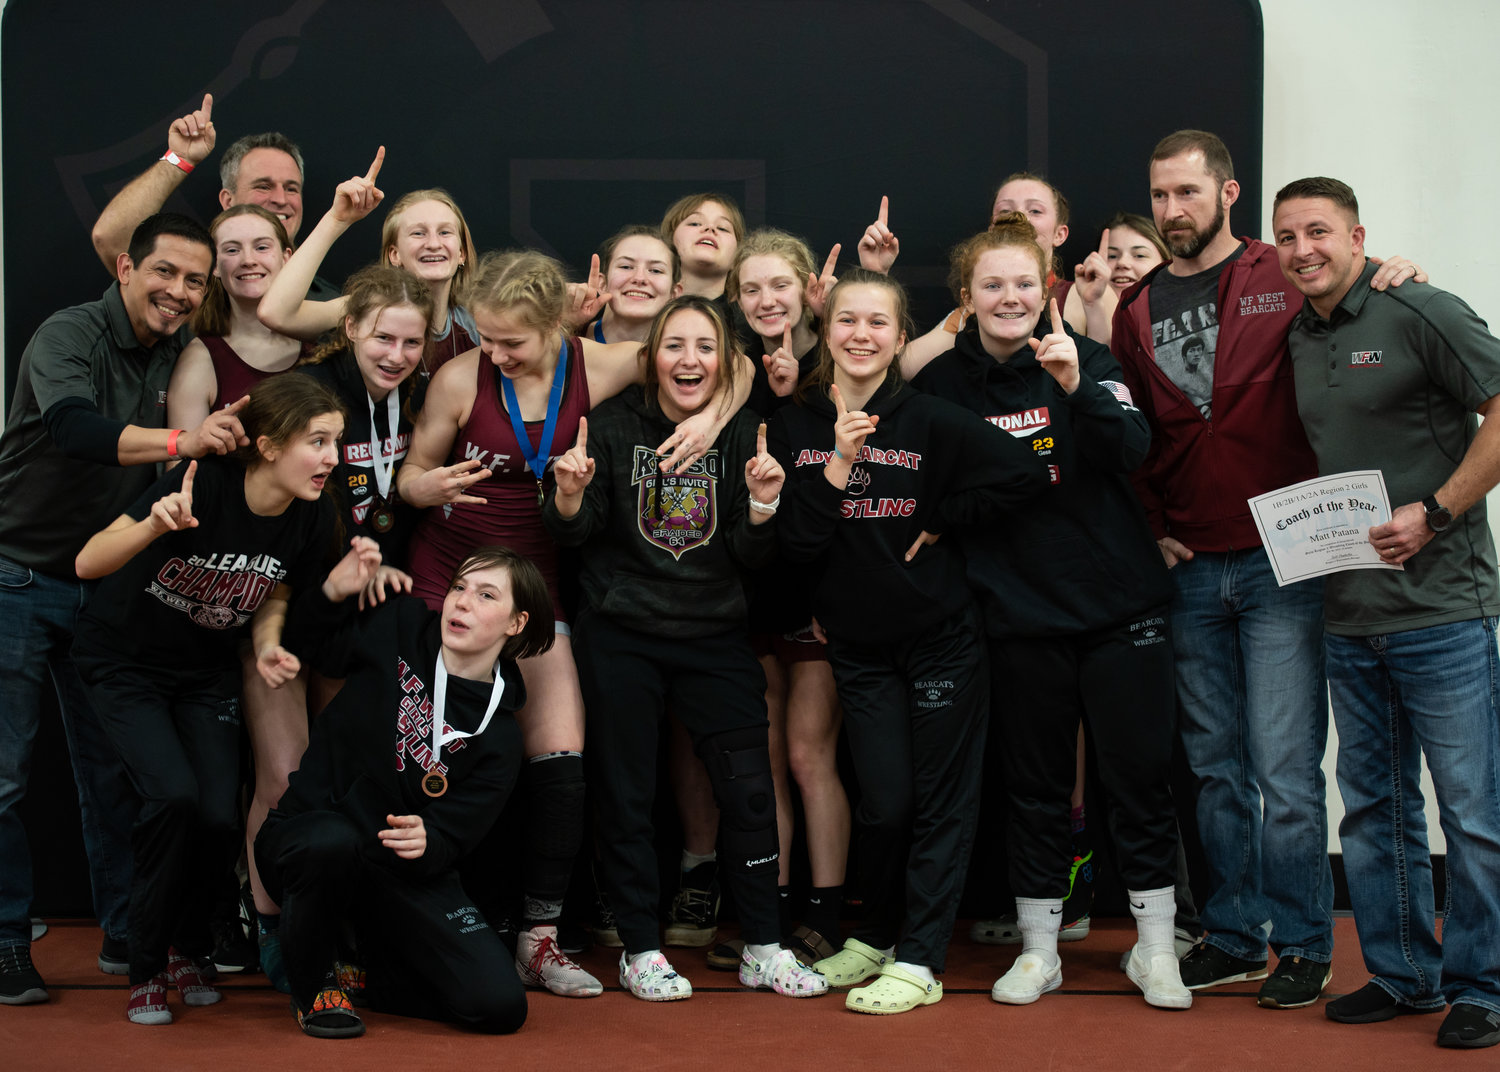 The W.F. West girls wrestling team poses for a photo after winning the 1B/2B/1A/2A Girls Regional Title at Shelton this weekend.